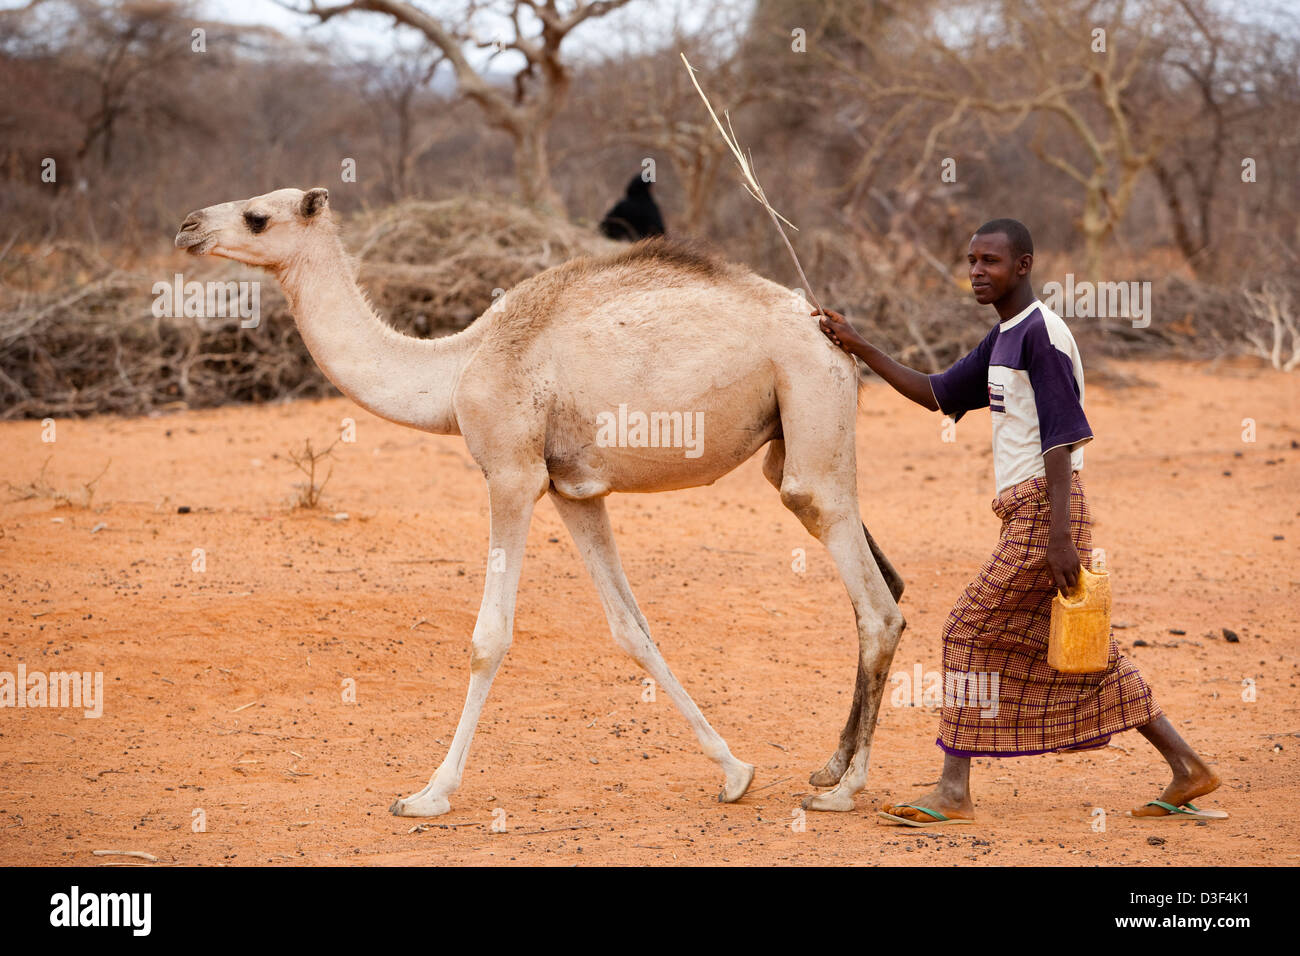 CHACHABOLE, NORTH OF ELWAK, EASTERN KENYA, 2nd SEPTEMBER 2009: A herder with a young camel. Stock Photo